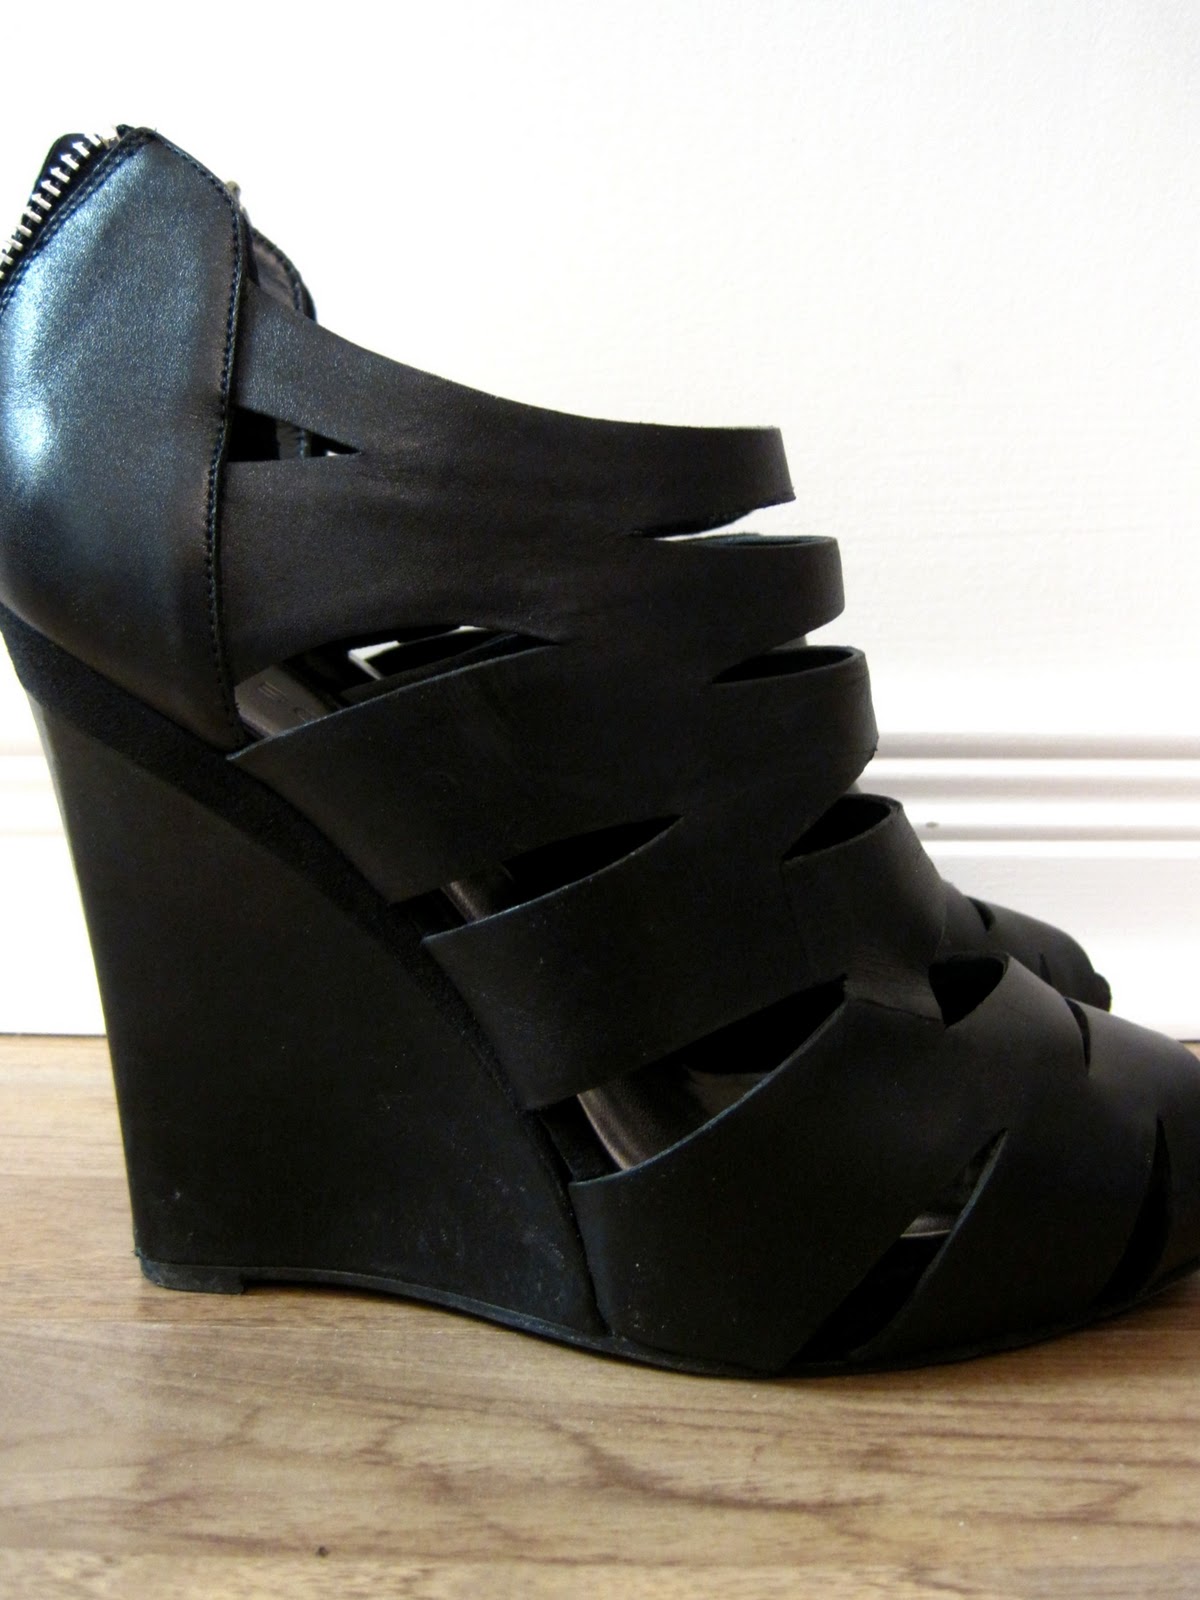 SHOP Monochroma.Chic: Black Cut-out Wedge Heels (SOLD)